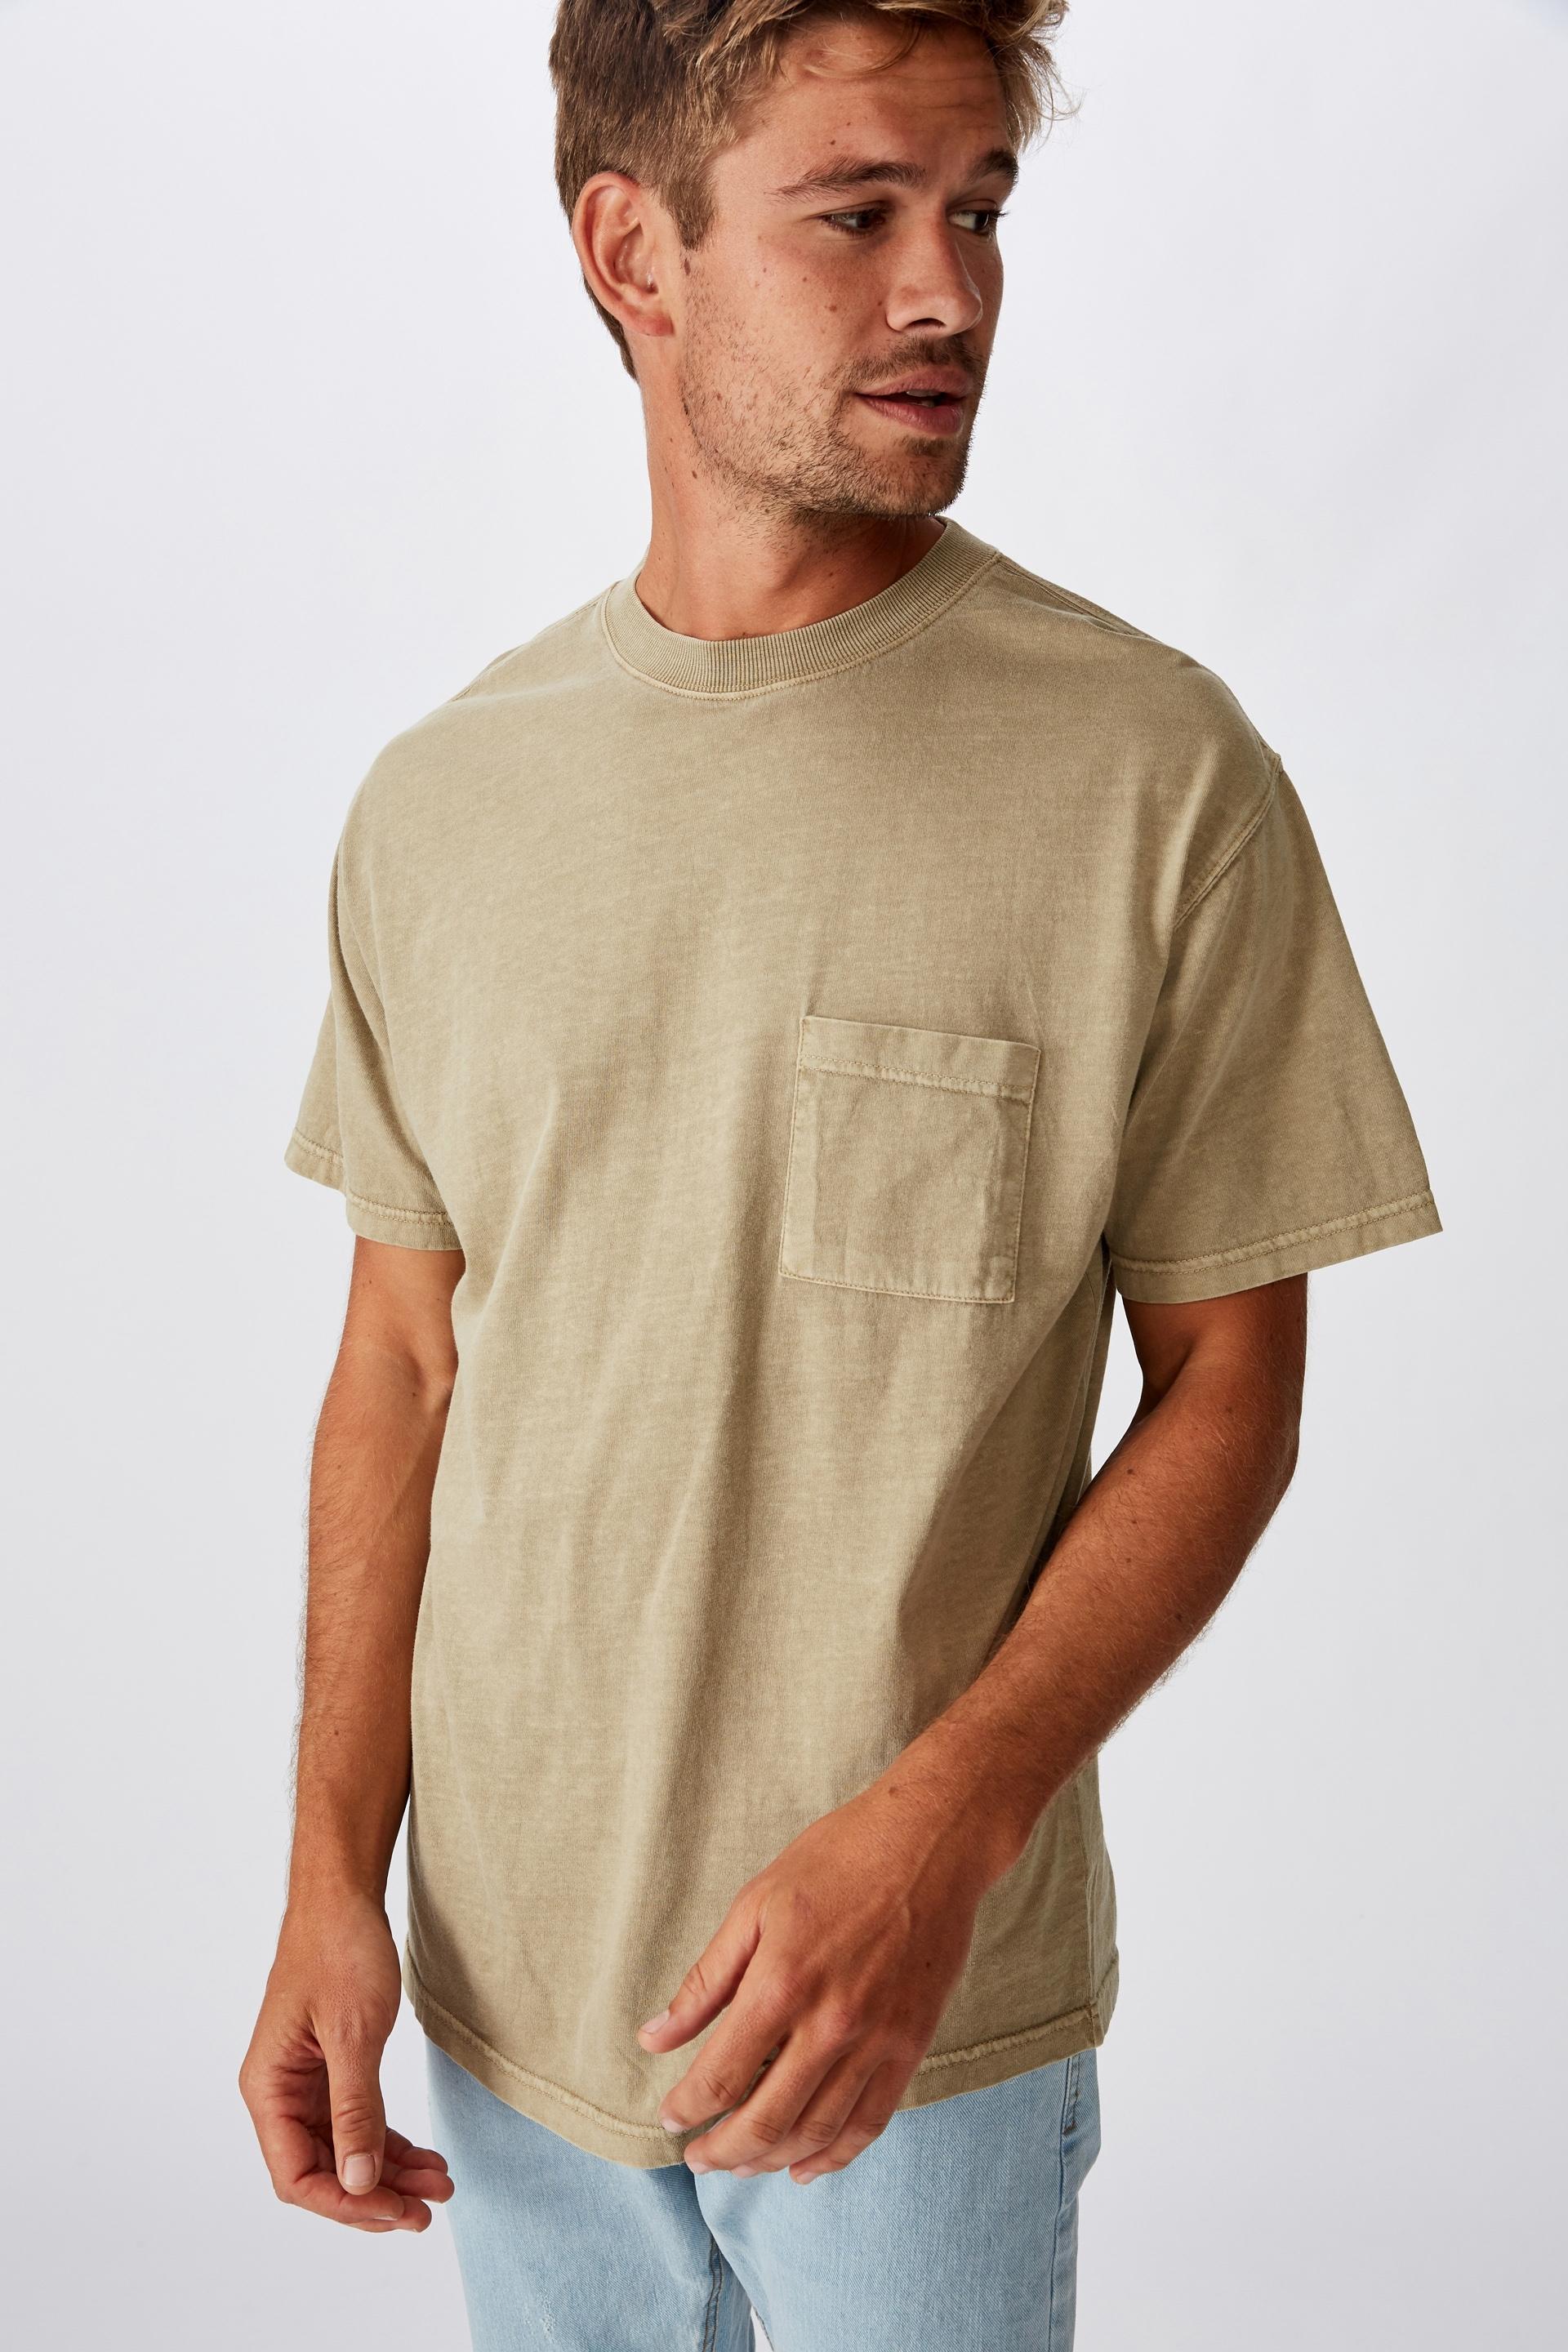 Loose fit washed pocket tee - gravel stone Cotton On T-Shirts & Vests ...